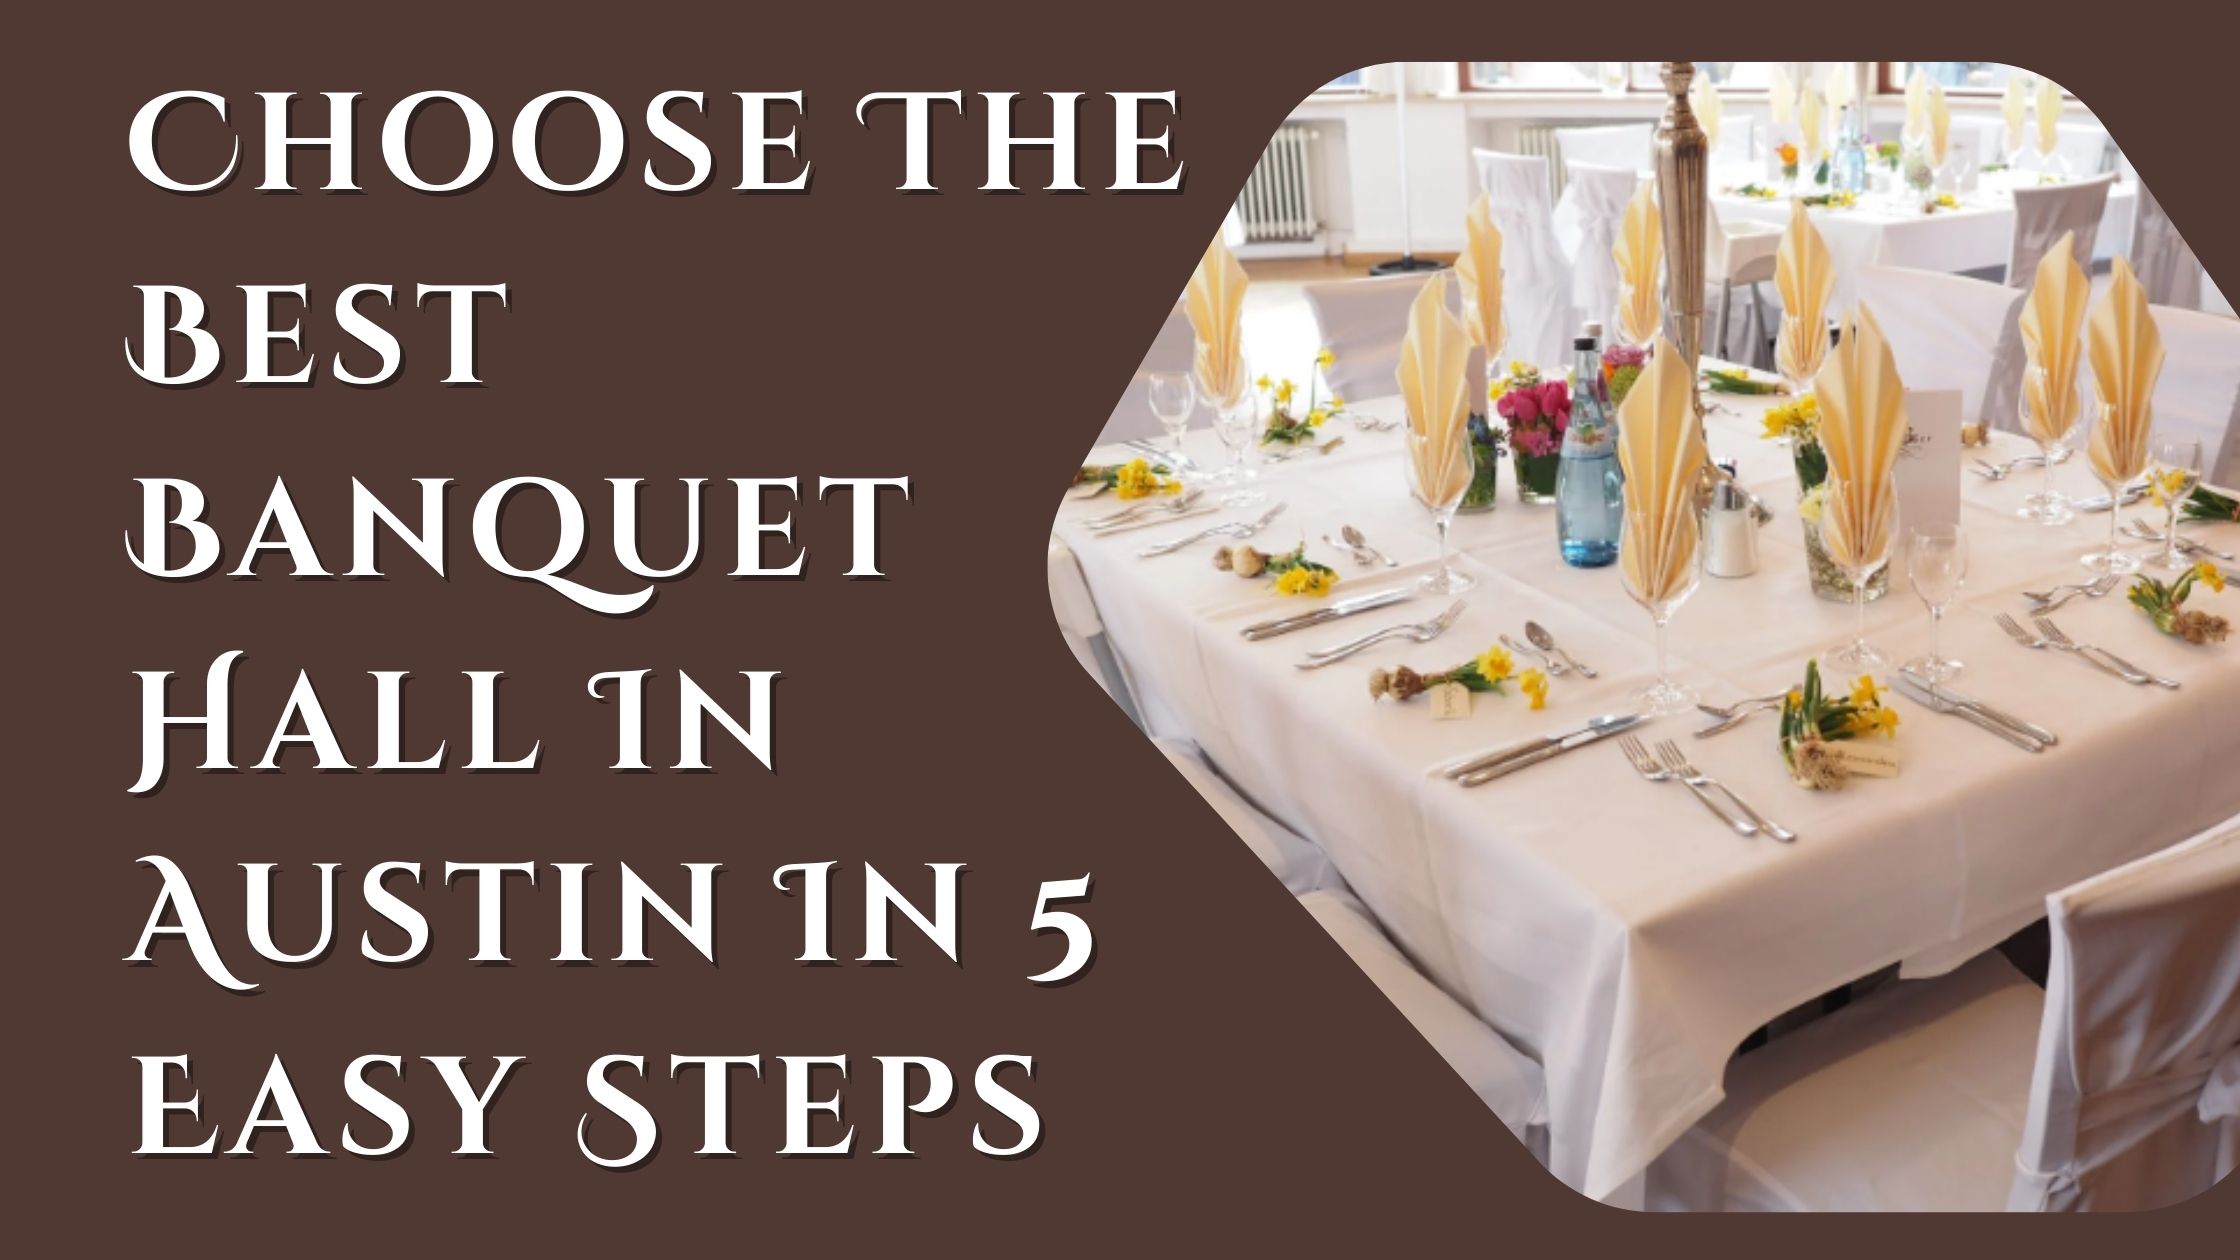 Choose The Best Banquet Hall In Austin In 5 Easy Steps